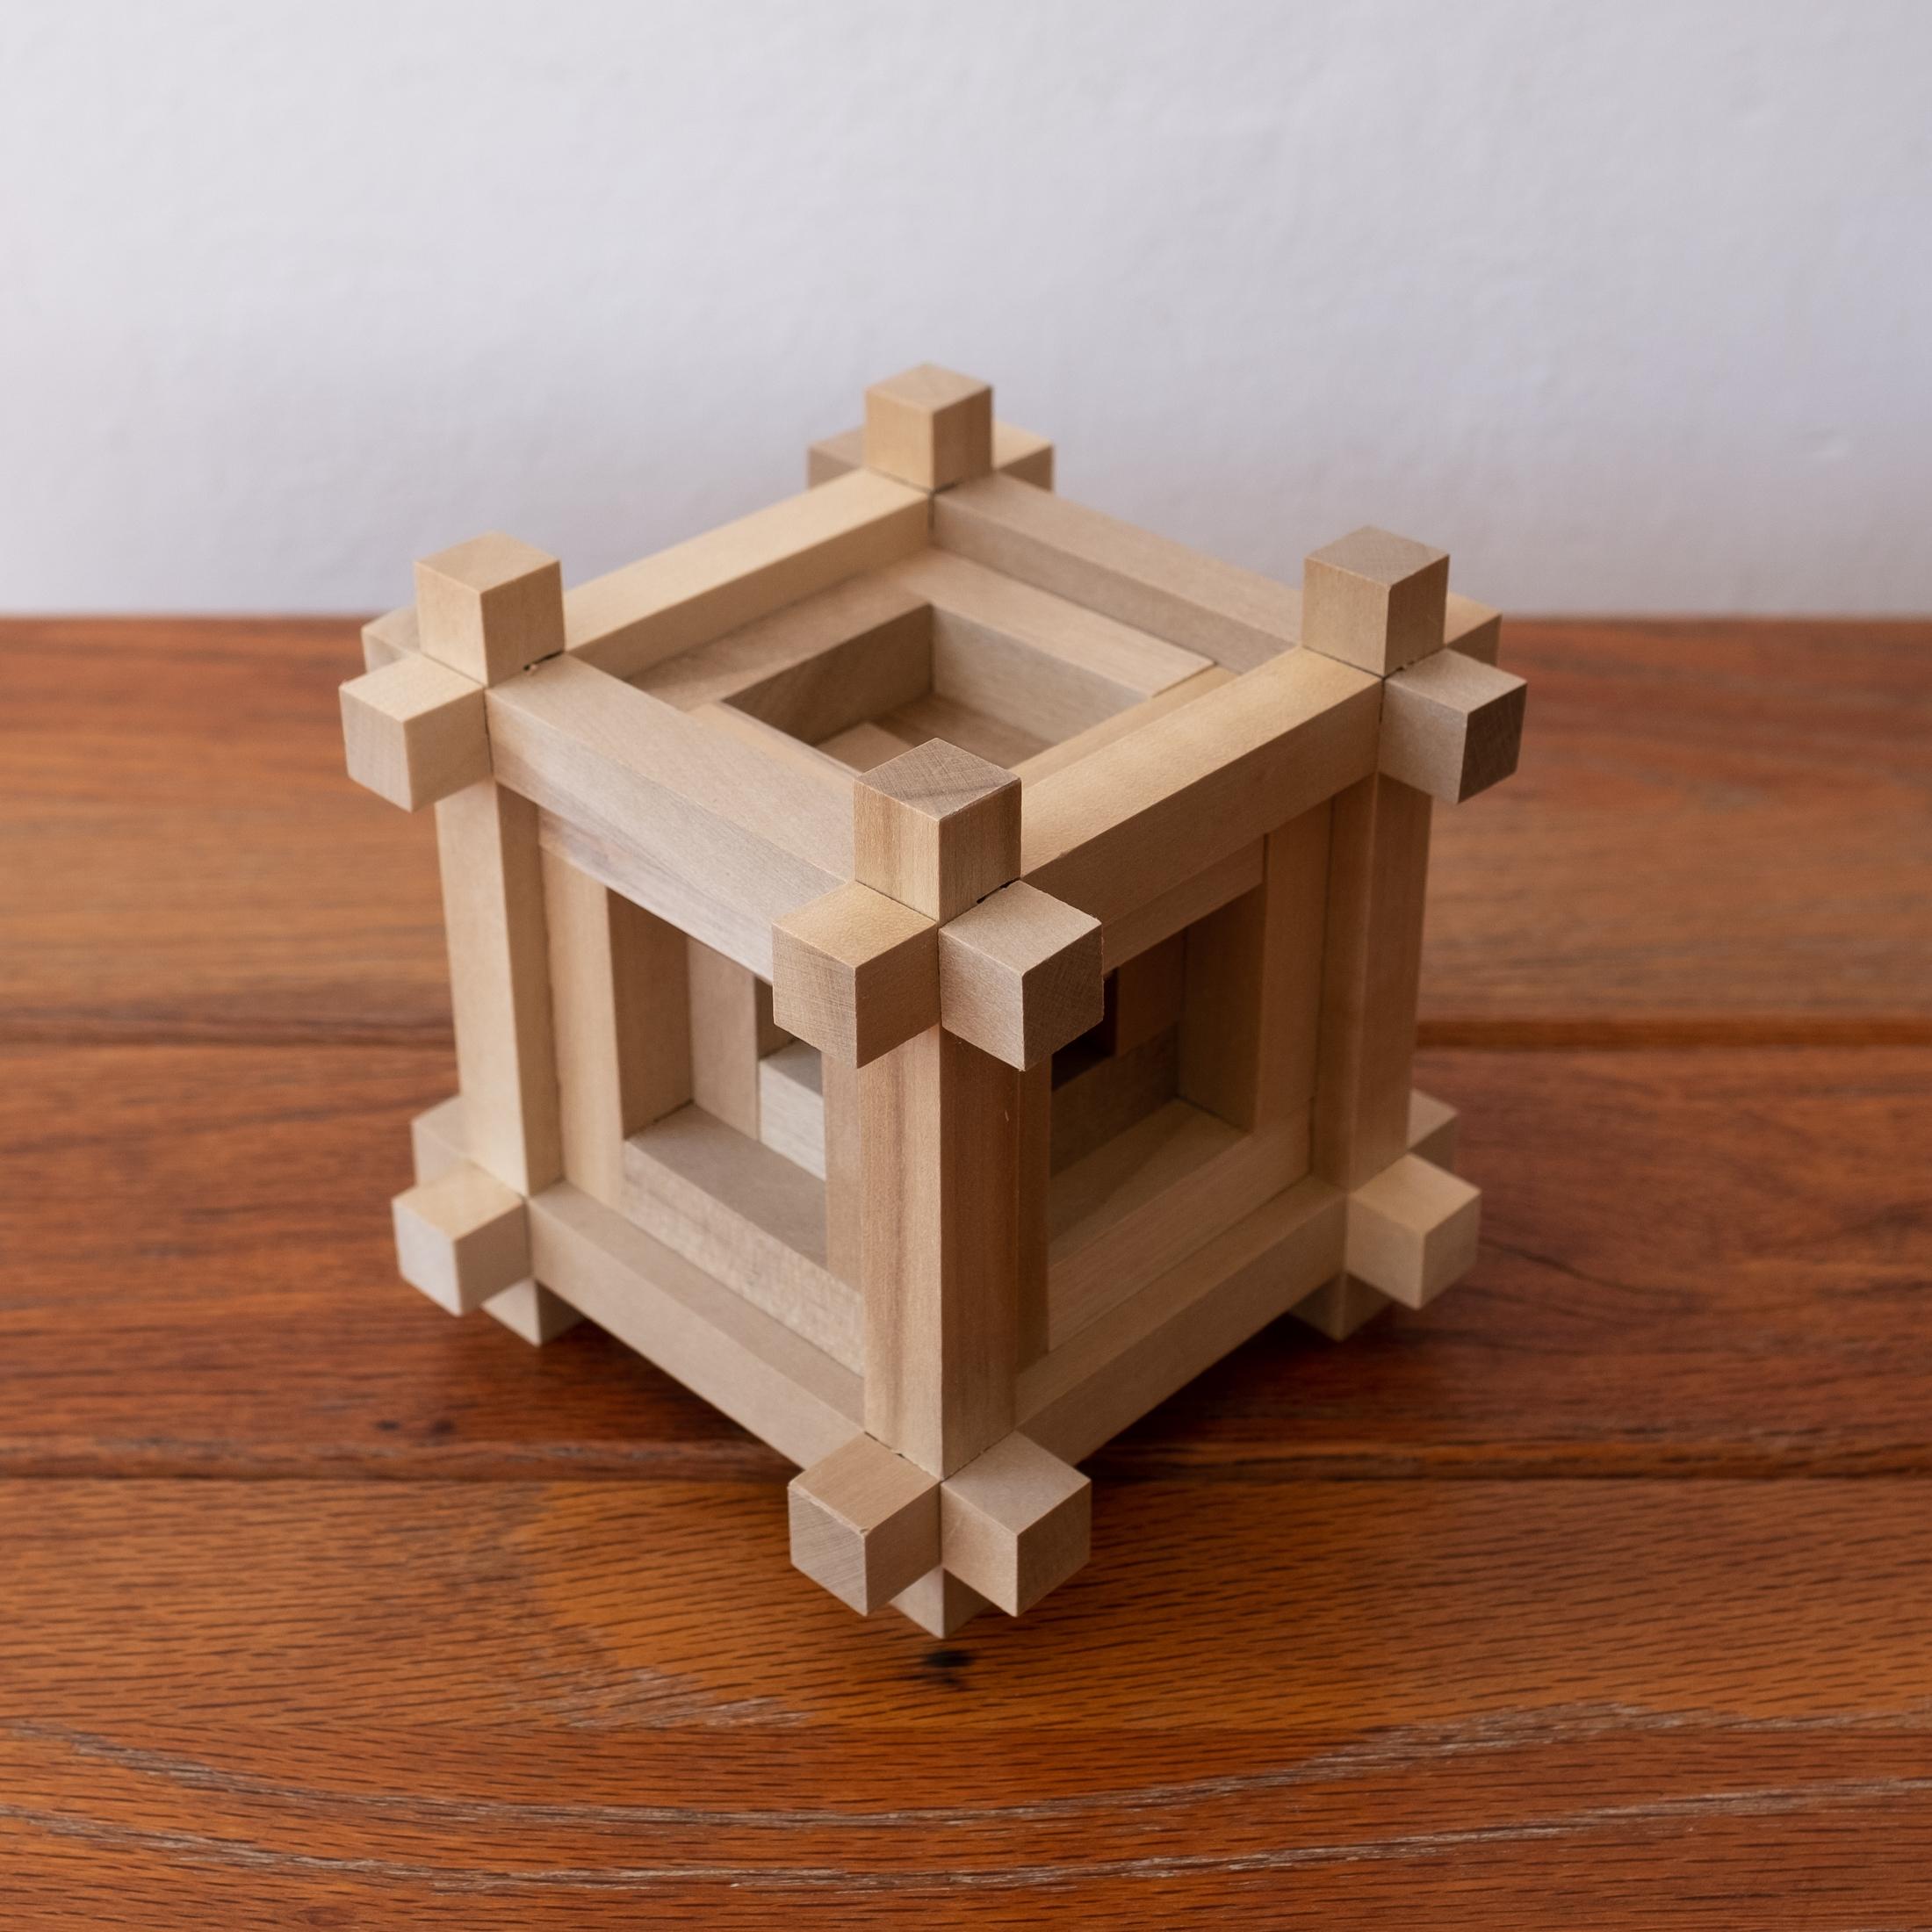 Wood puzzle sculpture by Sori Yanagi for Kumiki. Yanagi designed just a few puzzles for the company. Includes original box and paperwork, Japan, 1960s

Sori was the son of the Japanese Folk Crafts Museum founder, Soetsu Yanagi. Having studied both